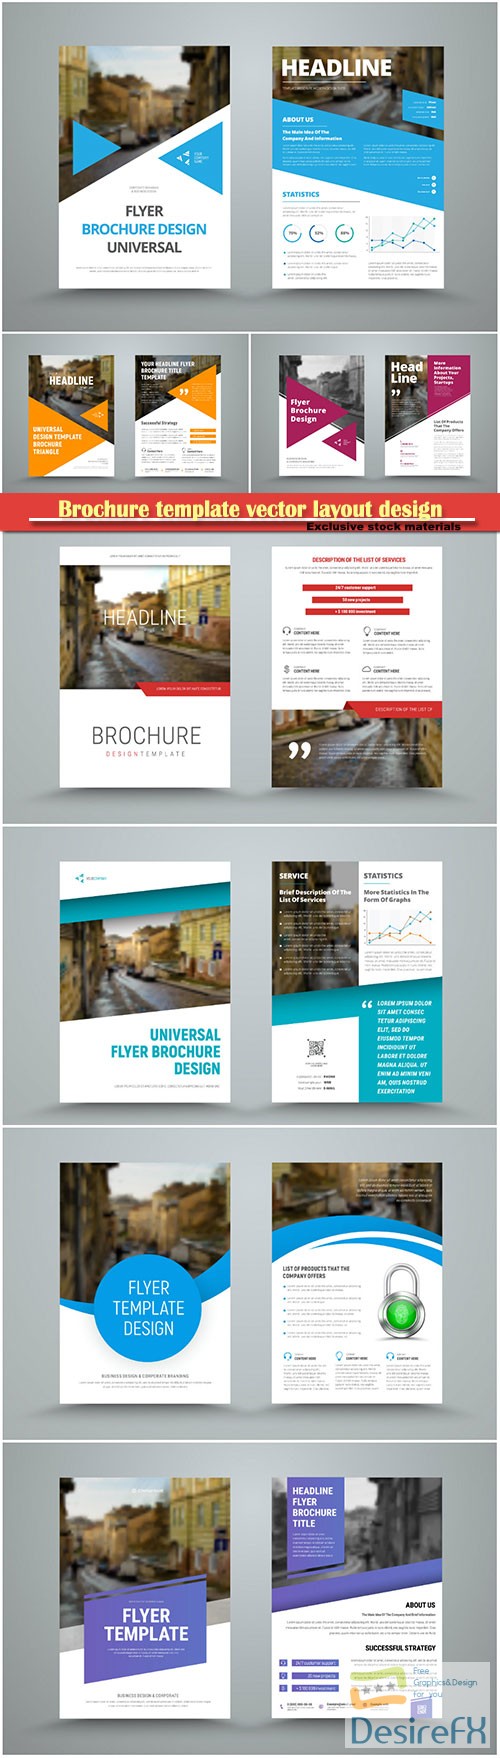 Brochure template vector layout design, corporate business annual report, magazine, flyer mockup # 171